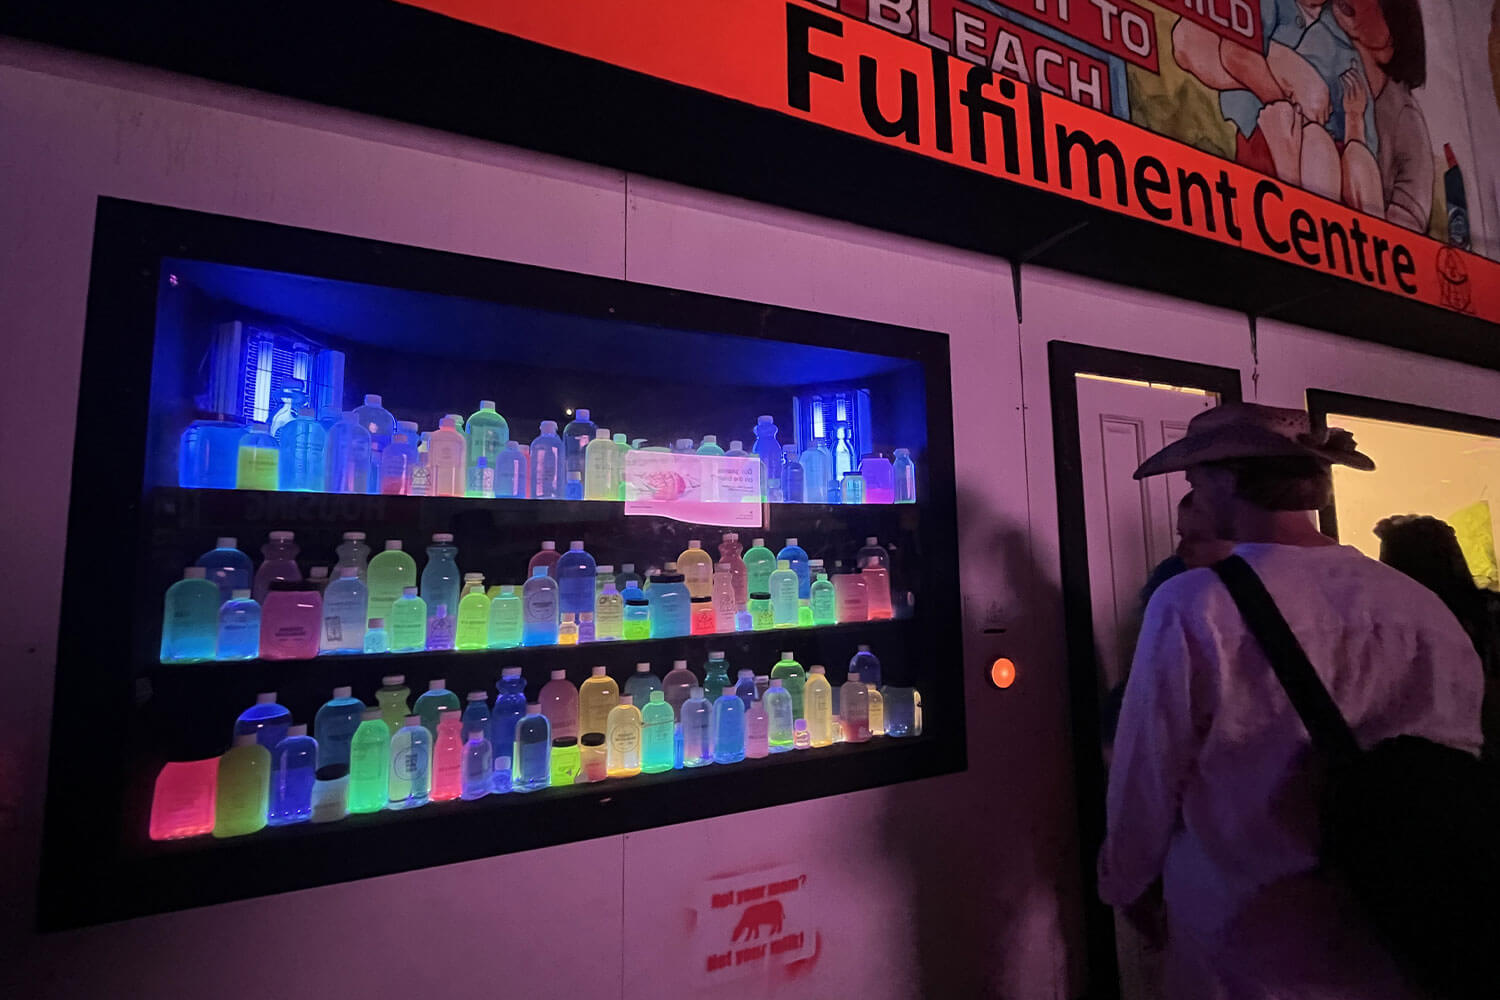 Student exhibition at Glastonbury, showcasing a number of different coloured bottles at night time